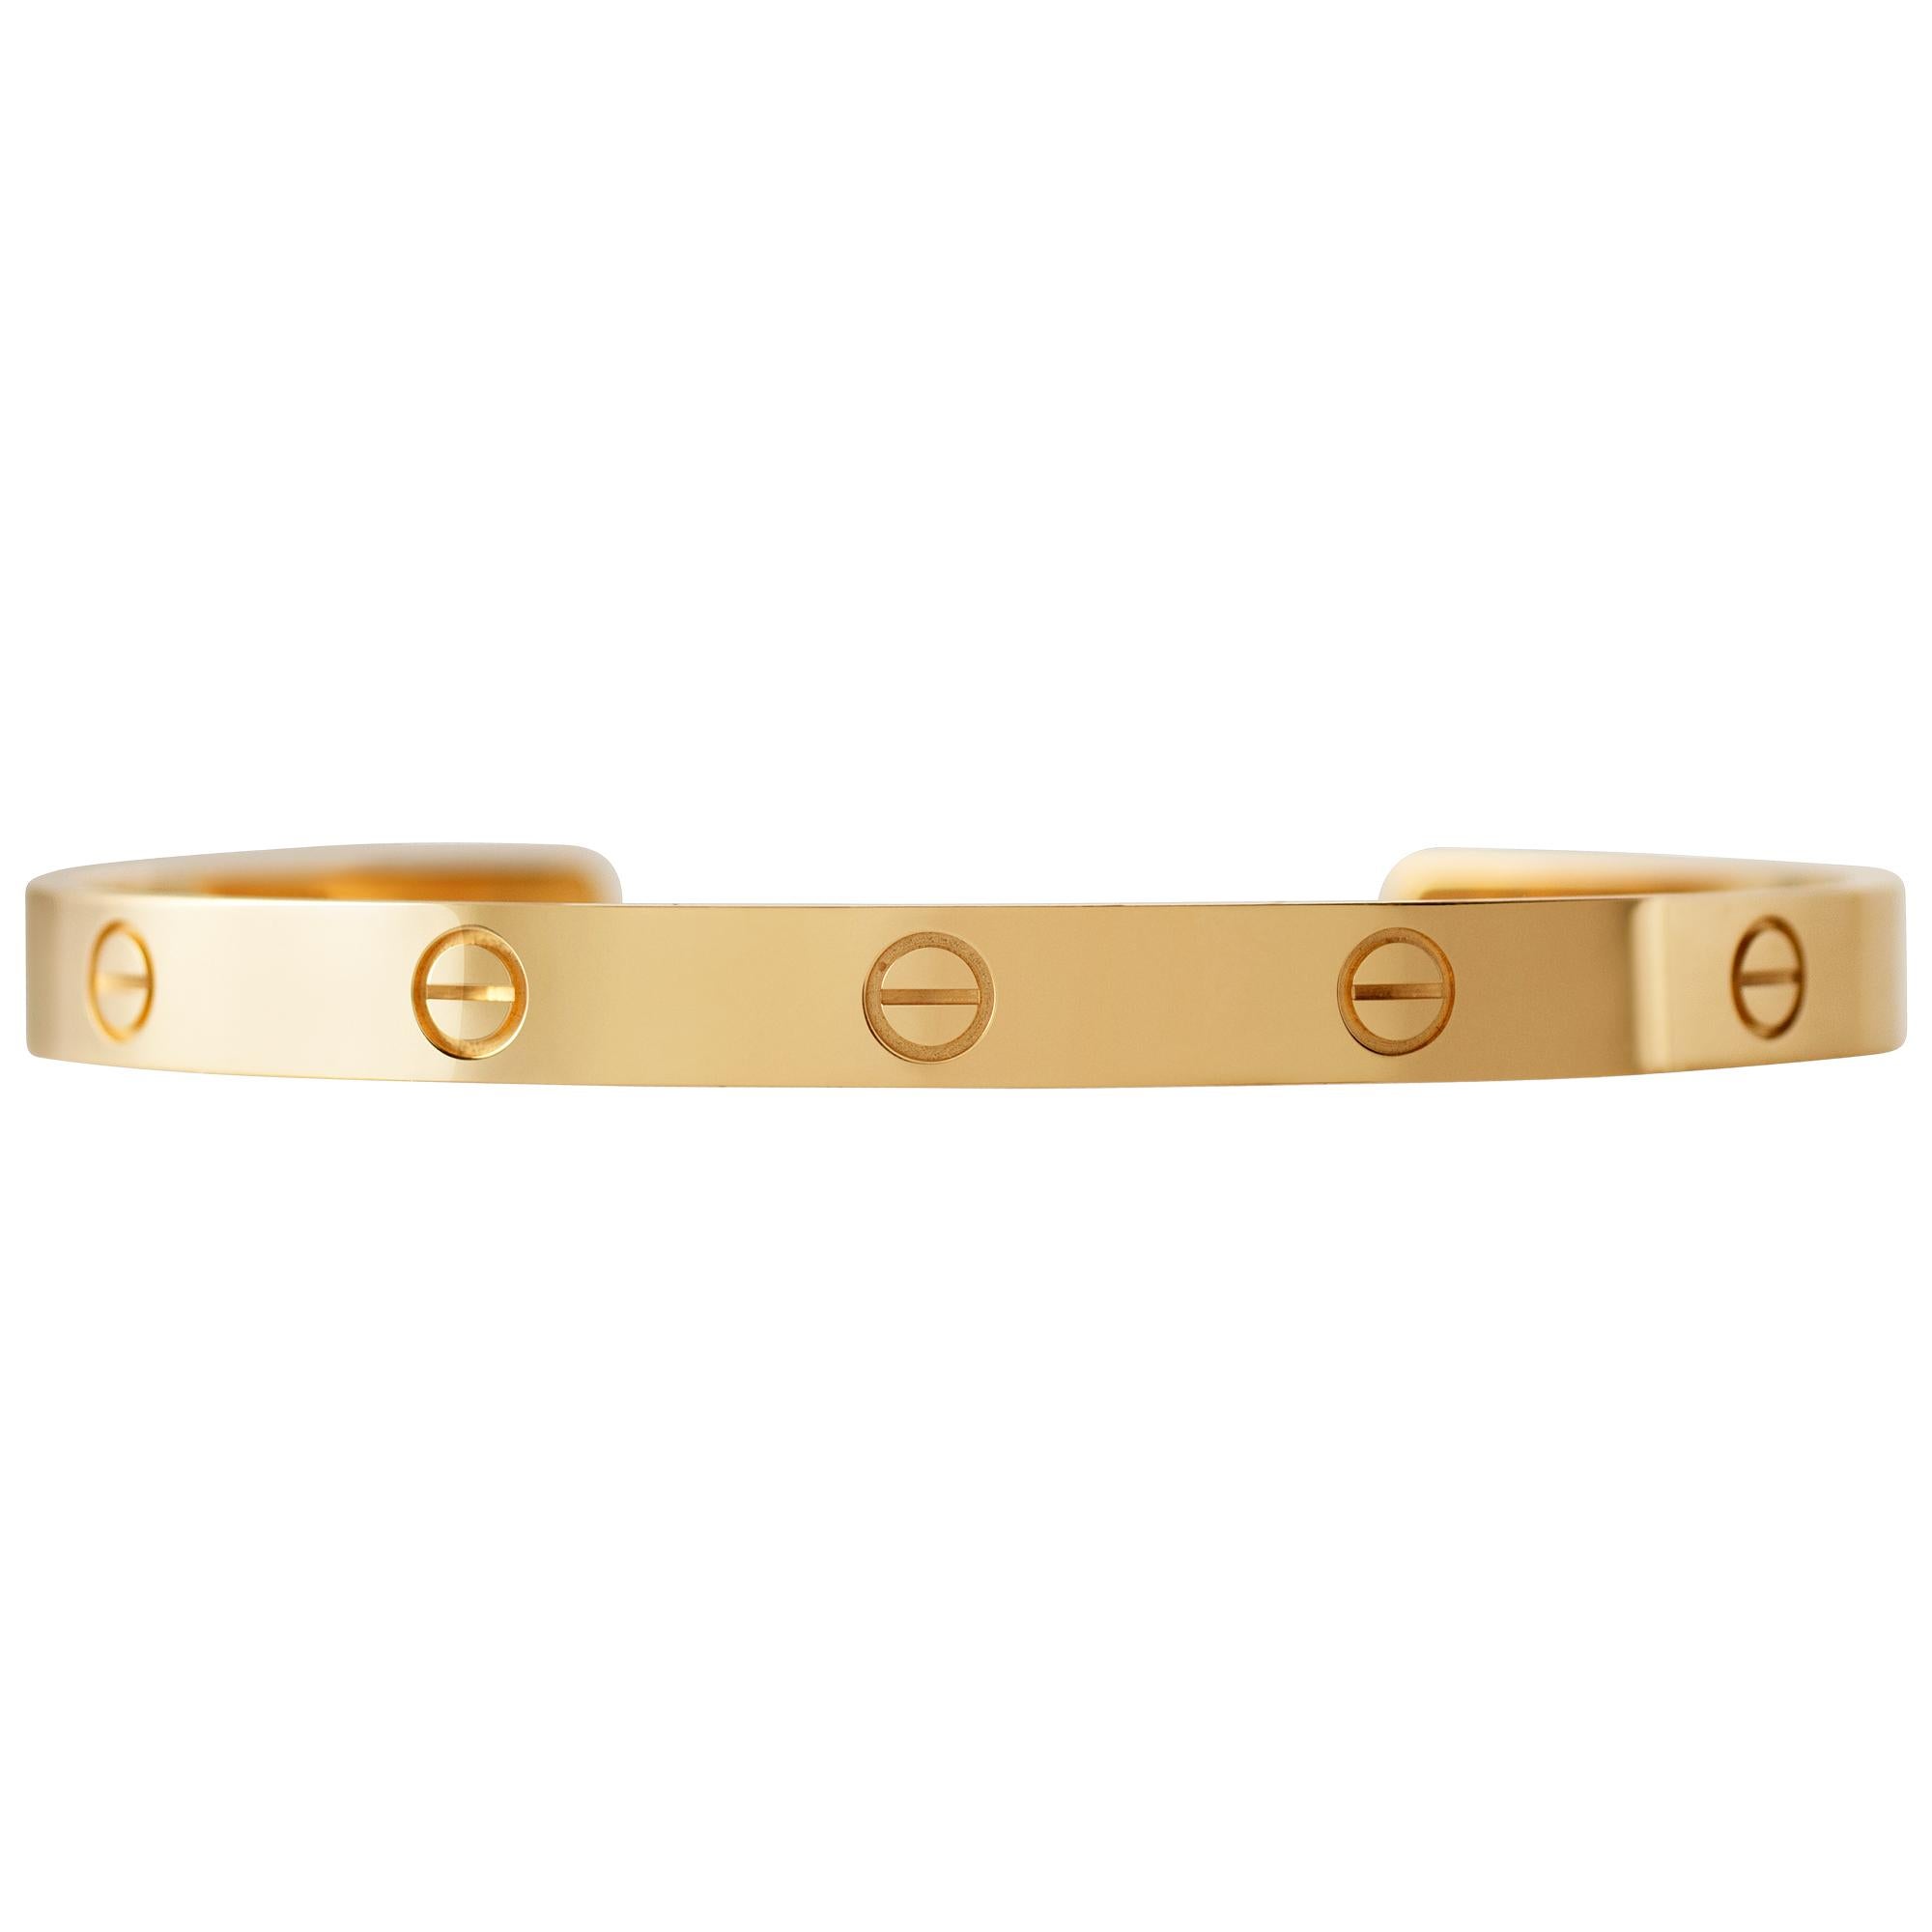 Cartier Love cuff/bangle in 18k yellow gold. Size 20, 6mm width. With Cartier box. Ref. B6032417
